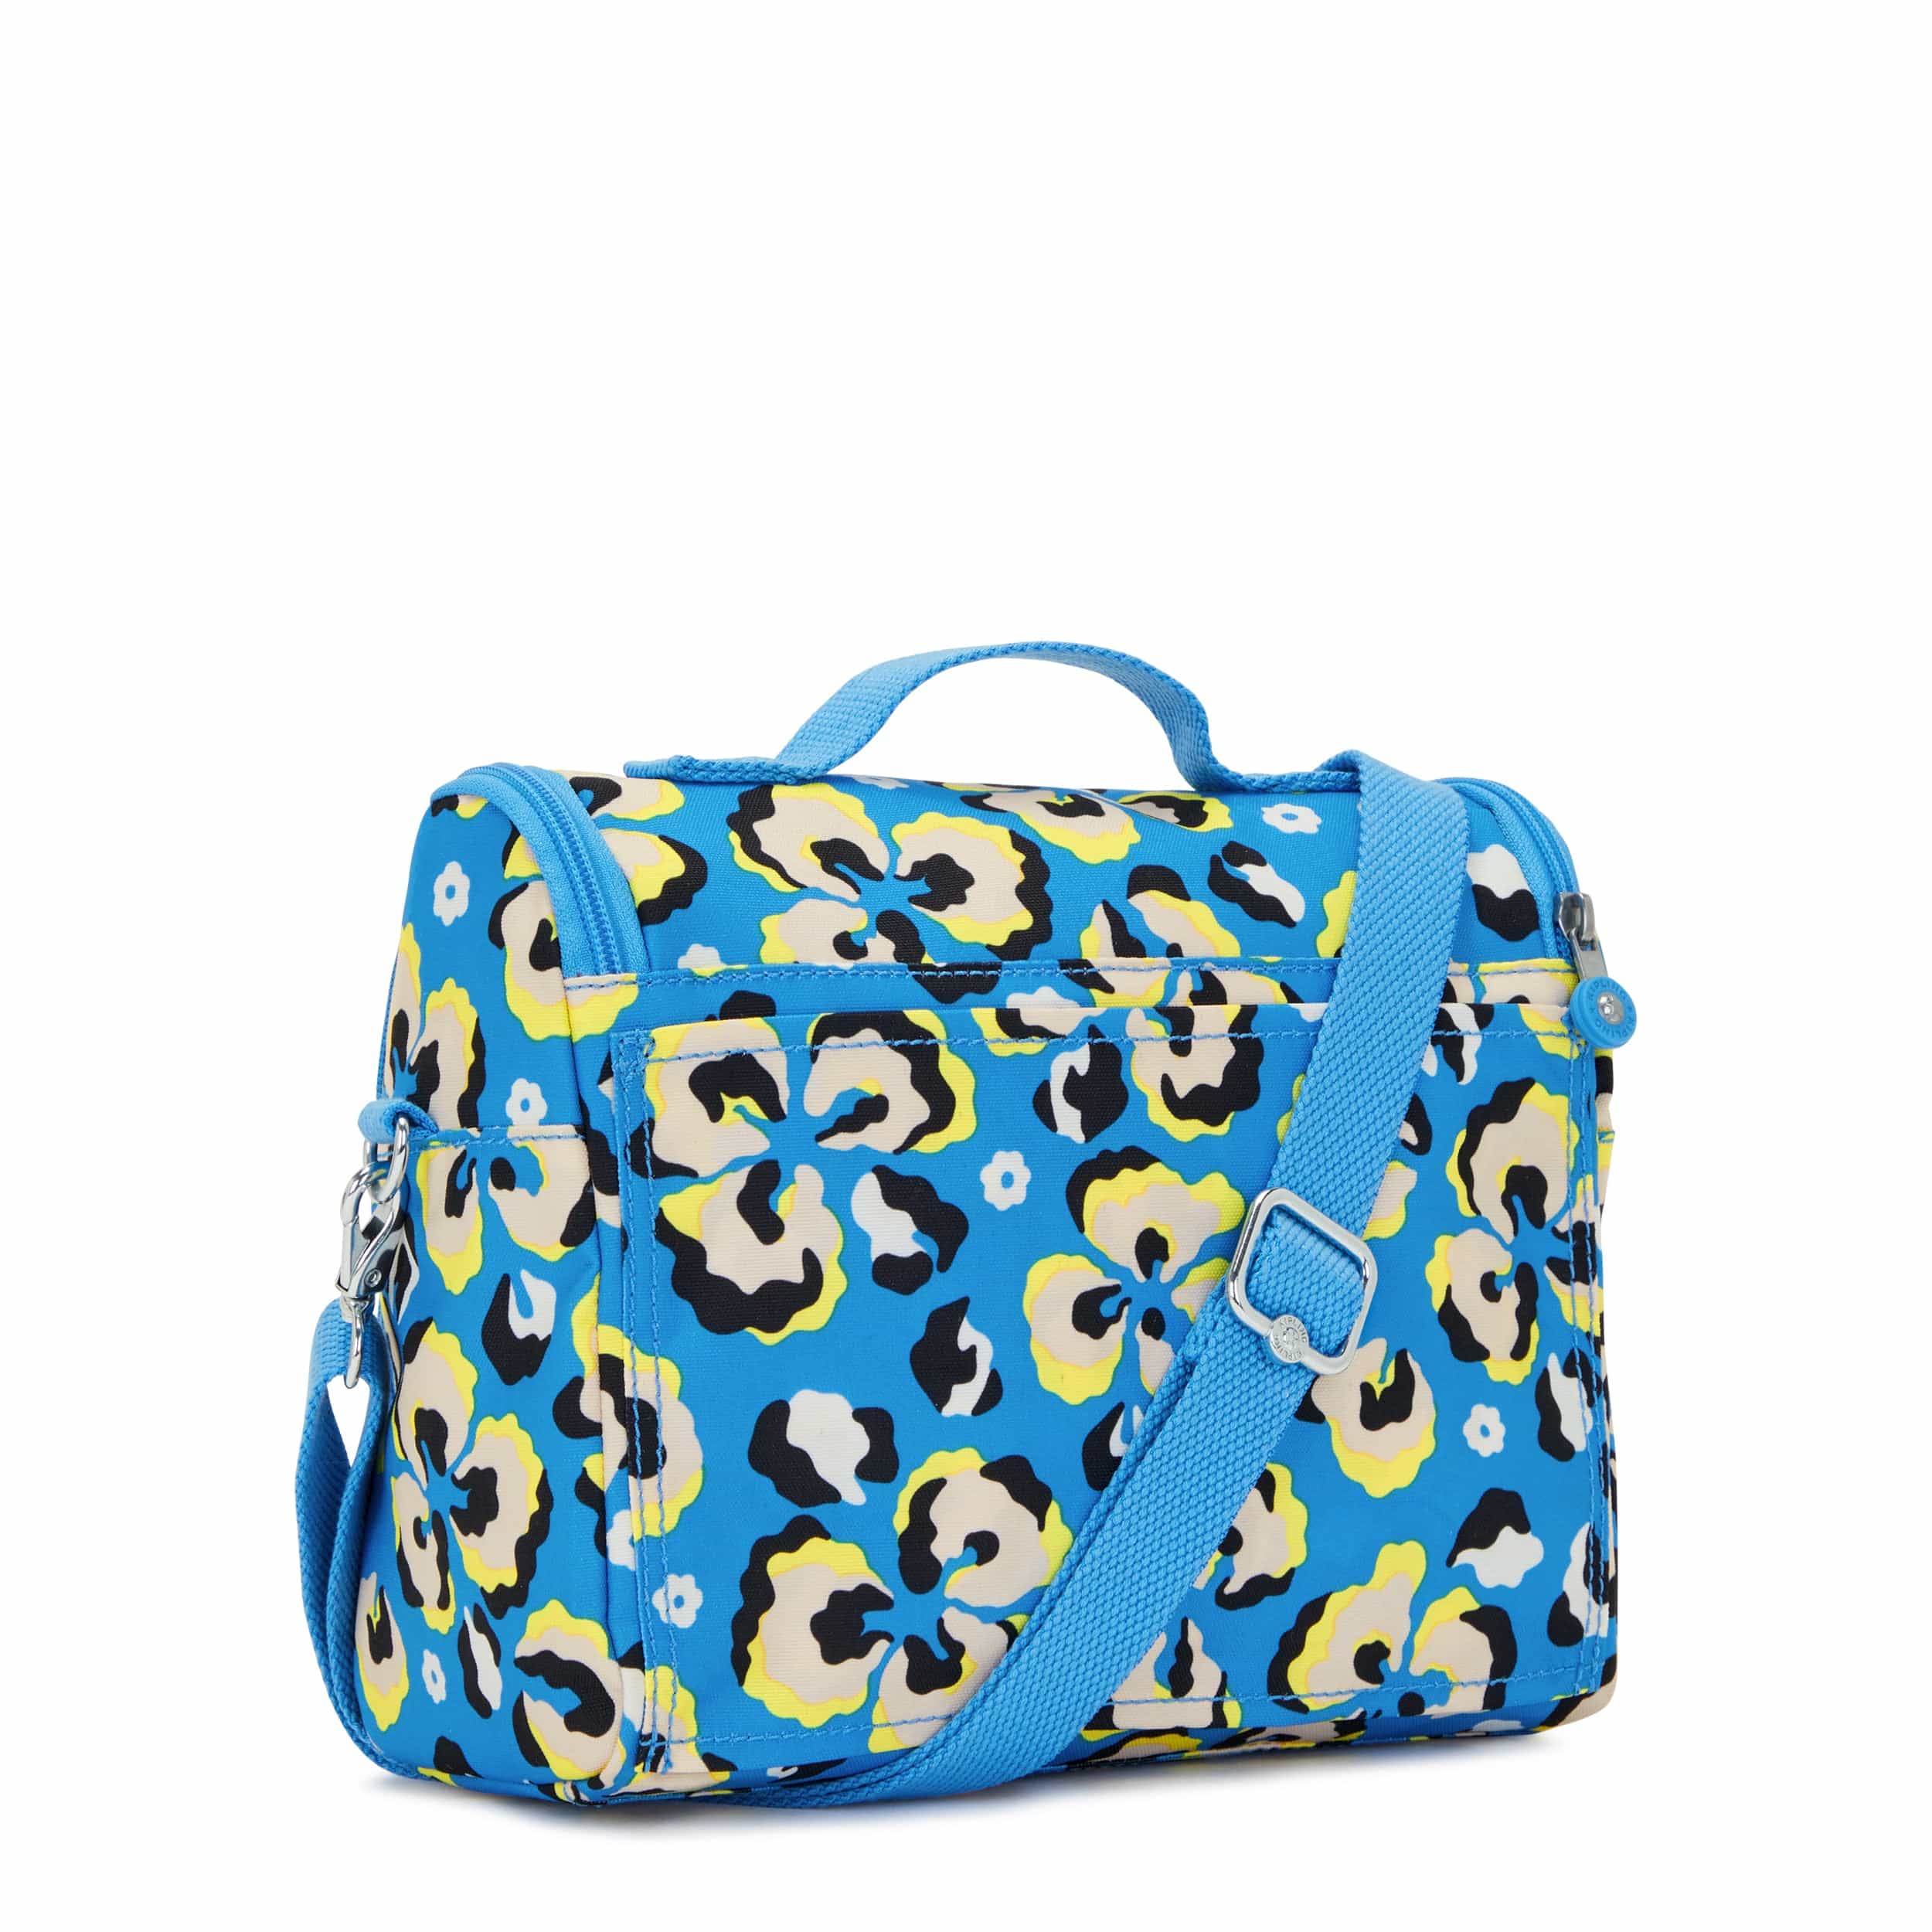 Kipling-New Kichirou-Large Lunchbox (With Trolley Sleeve)-Leopard Floral-I5749-P2A